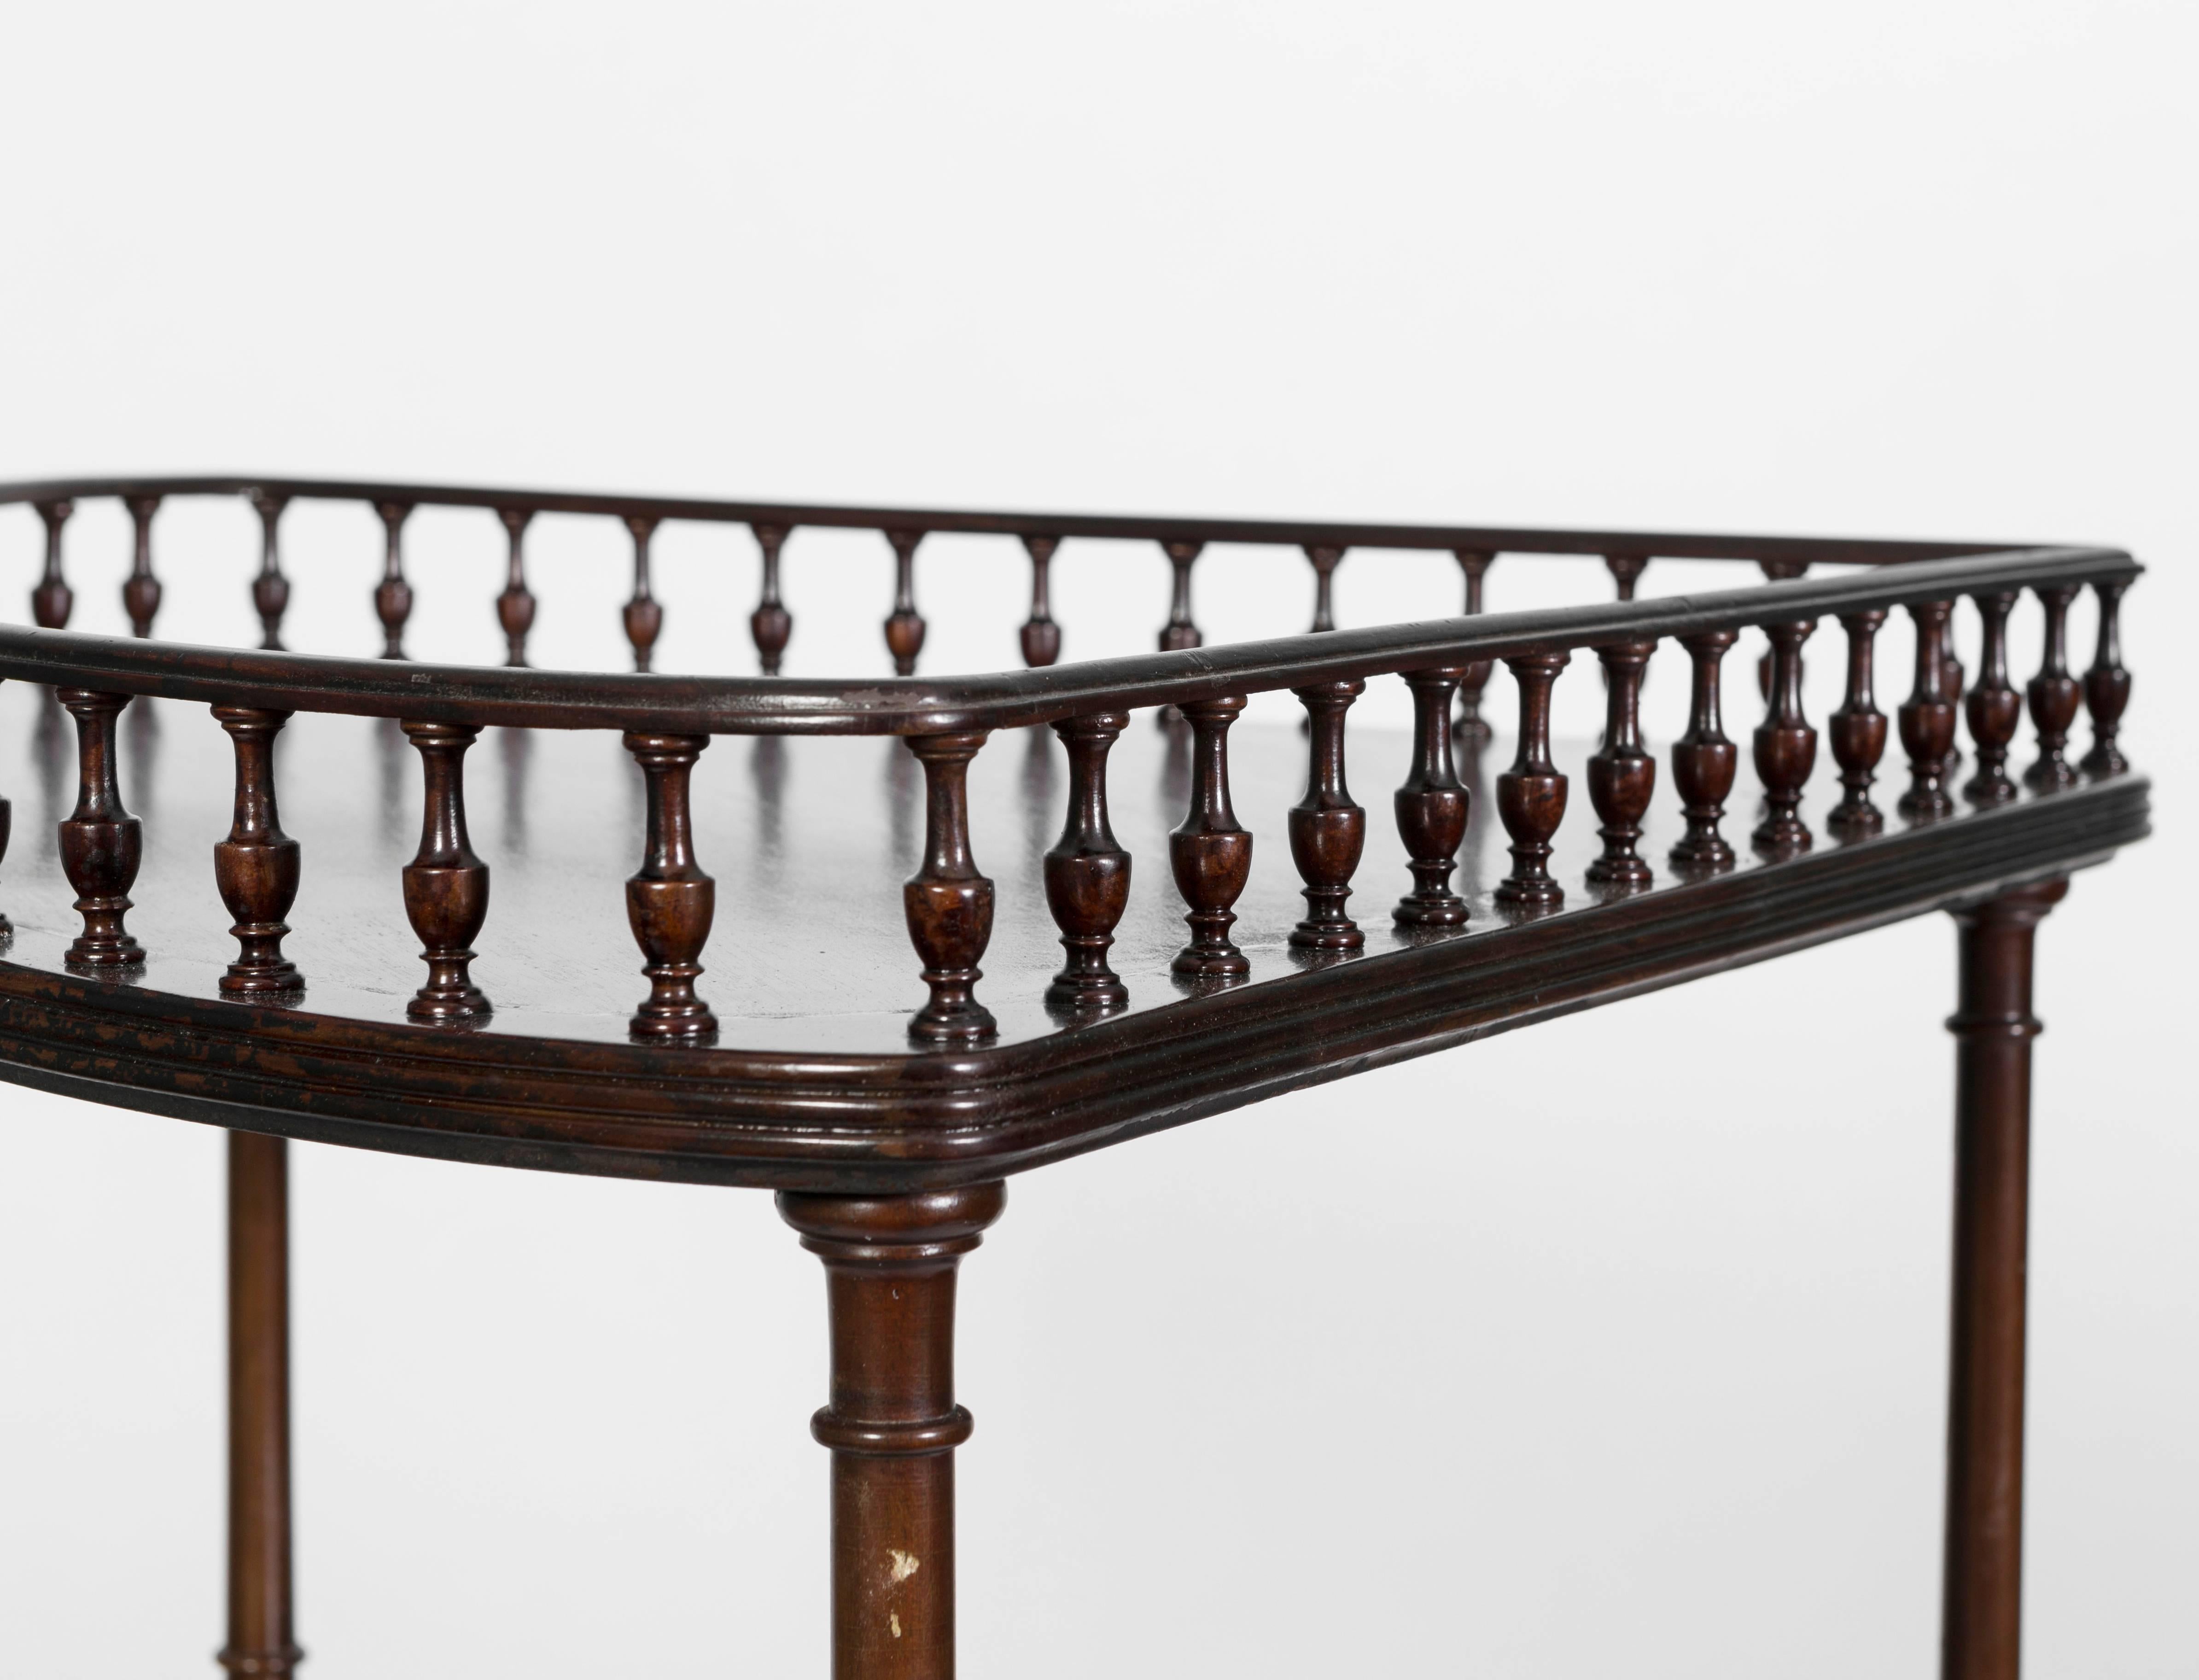 George III style mahogany three-tiered corner stand. The stand has a gallery rail on the top shelf . The corner piece makes for a perfect stand for bar accessories or a great shelf for a corner piece in the bath. This piece is both beautiful and